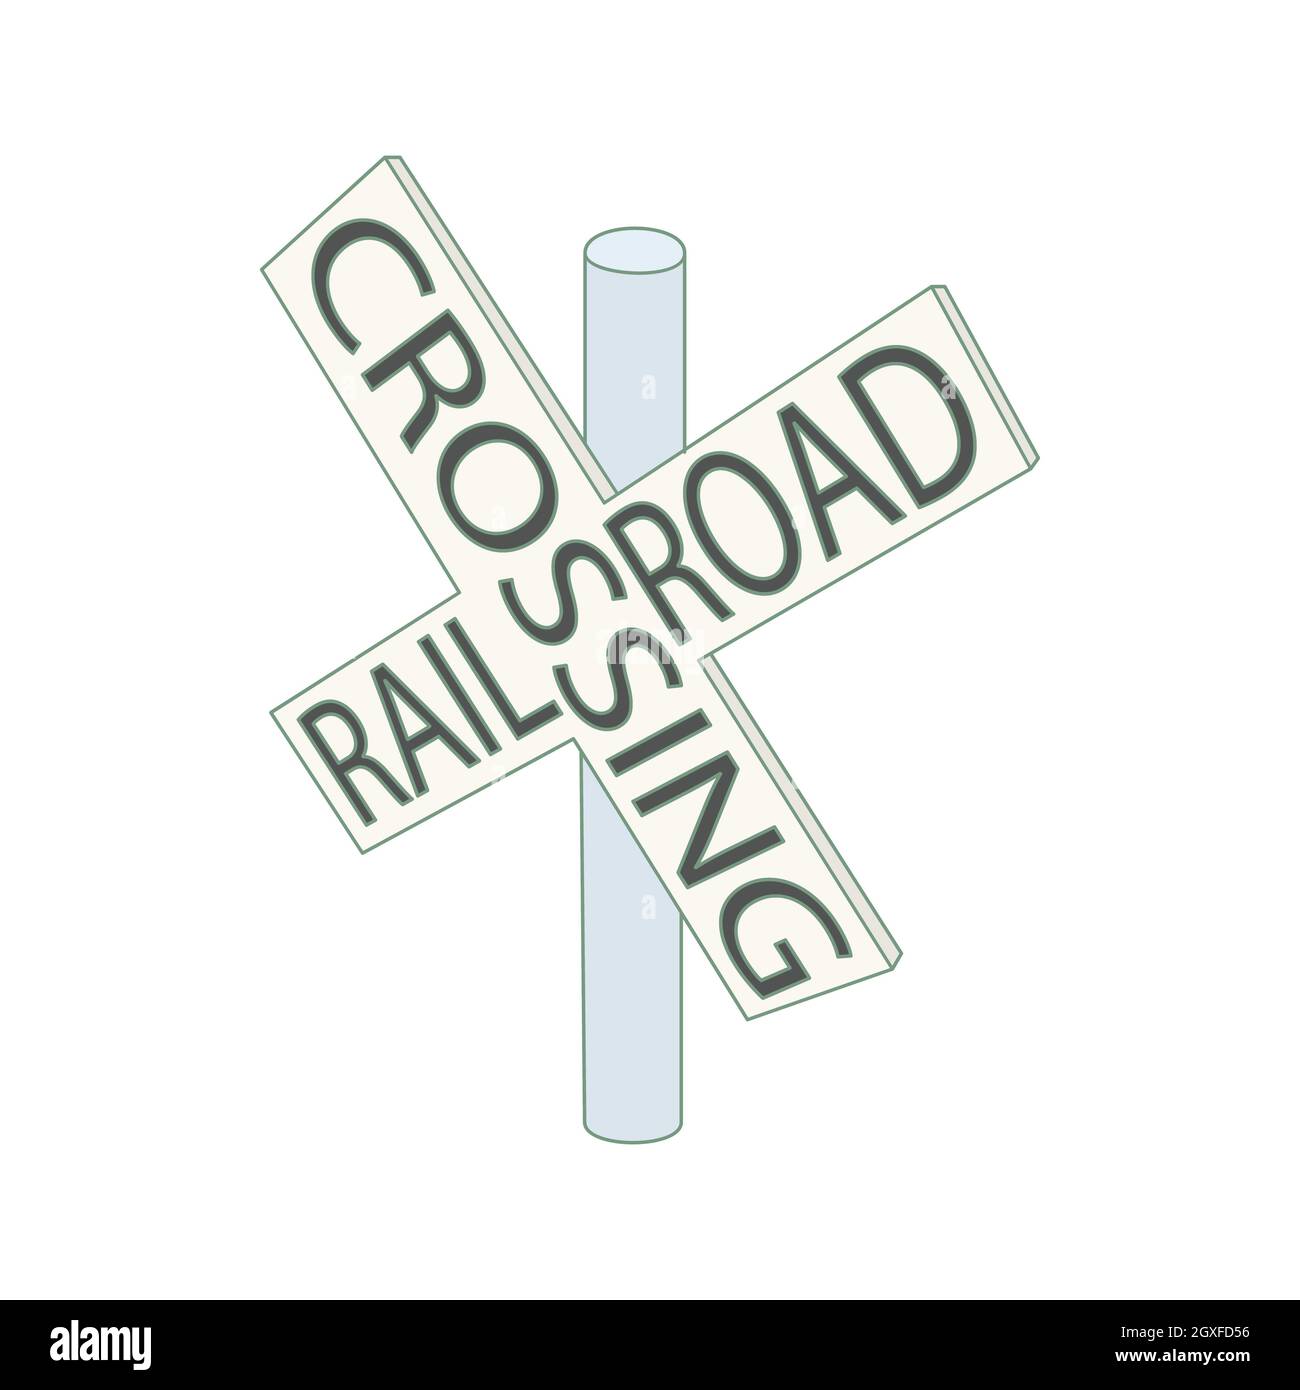 Railroad crossing sign icon in cartoon style on a white background Stock Photo